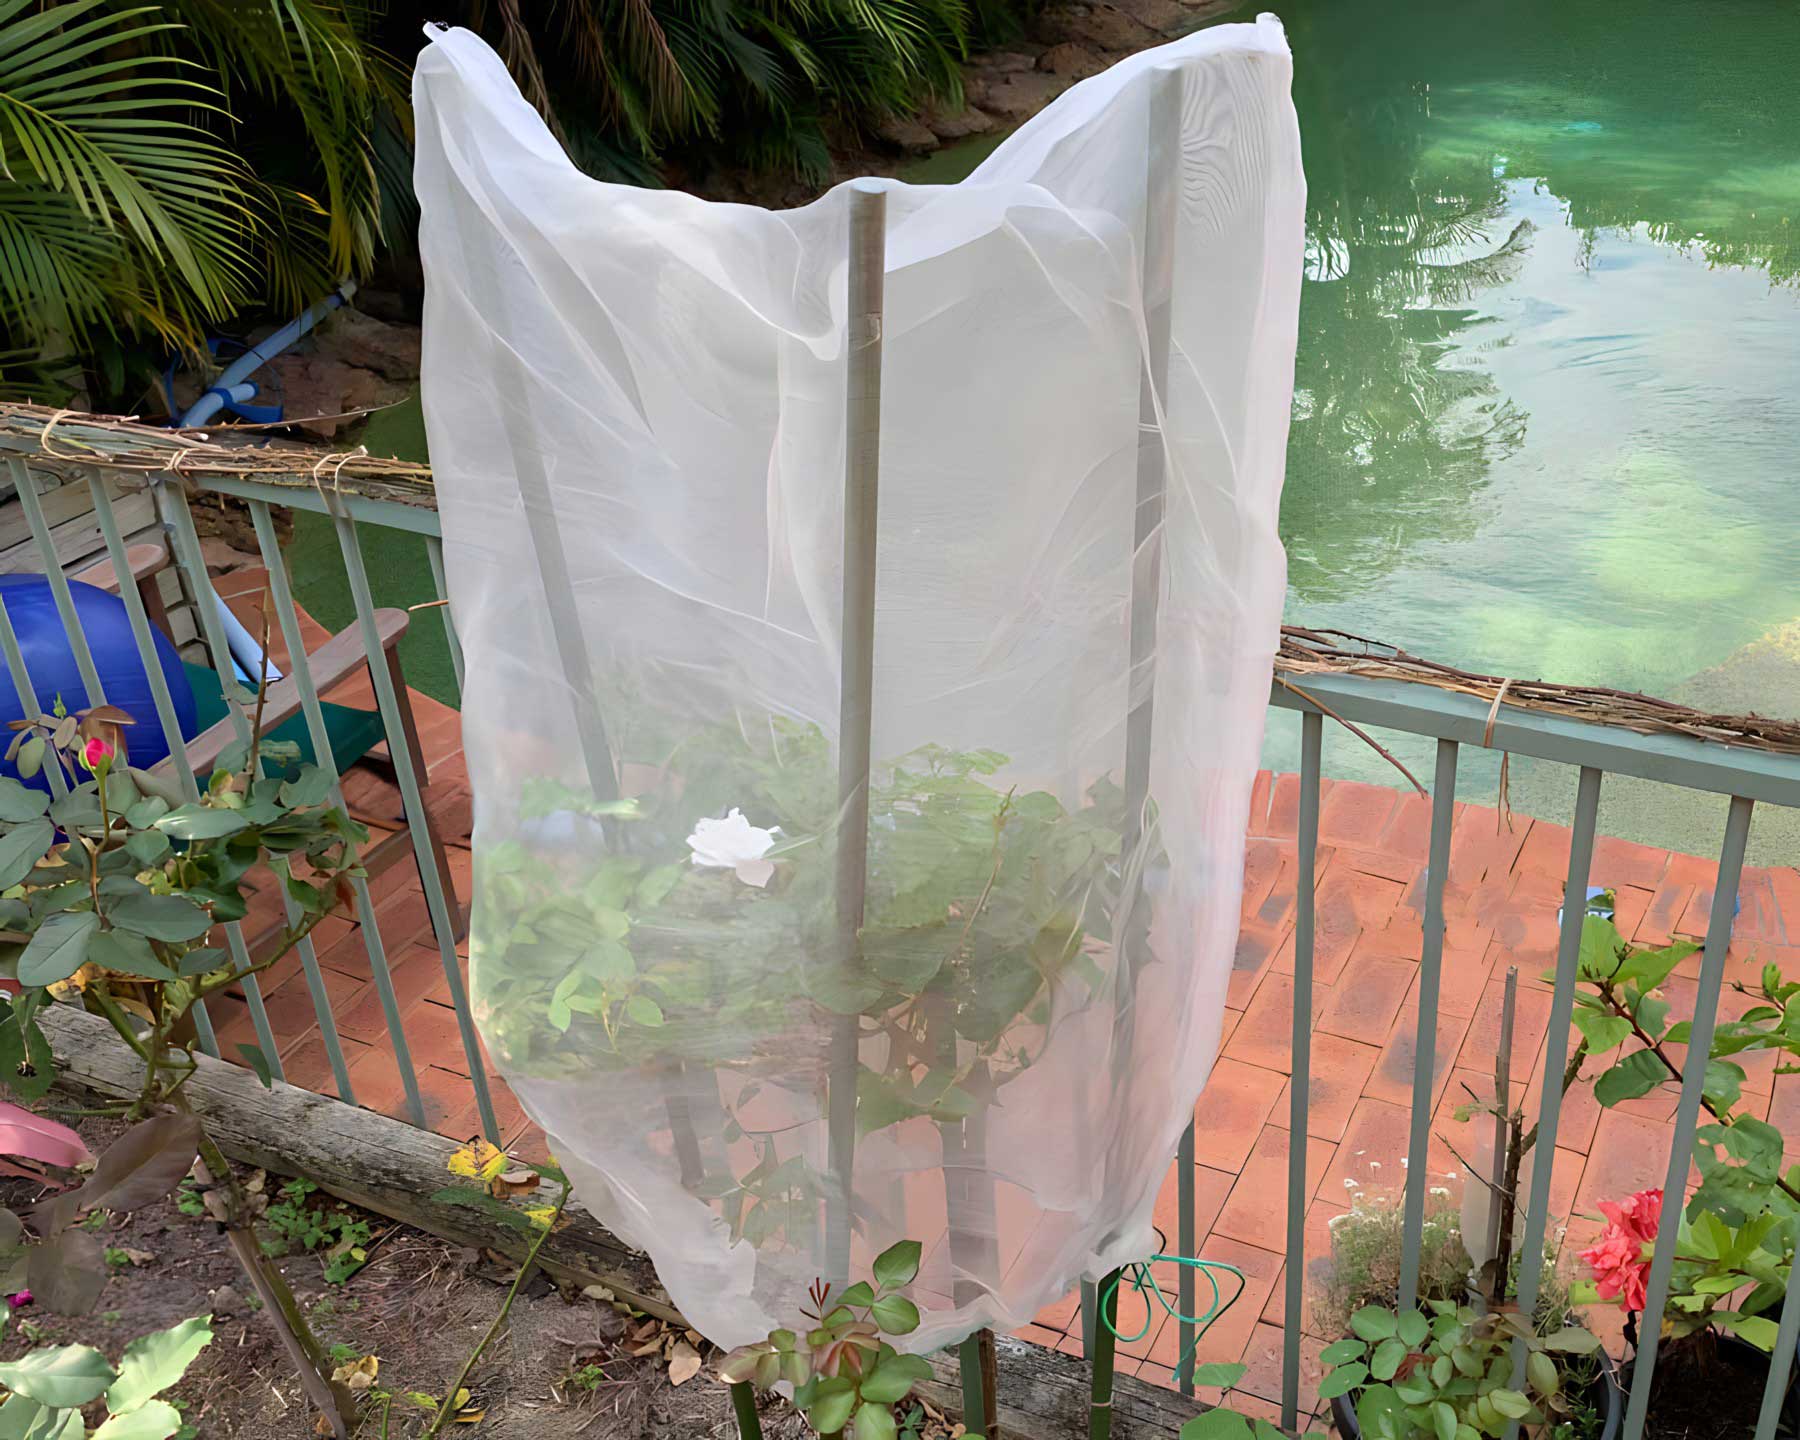 Fruit Saver Bag - this time protecting Roses from hungry Possums